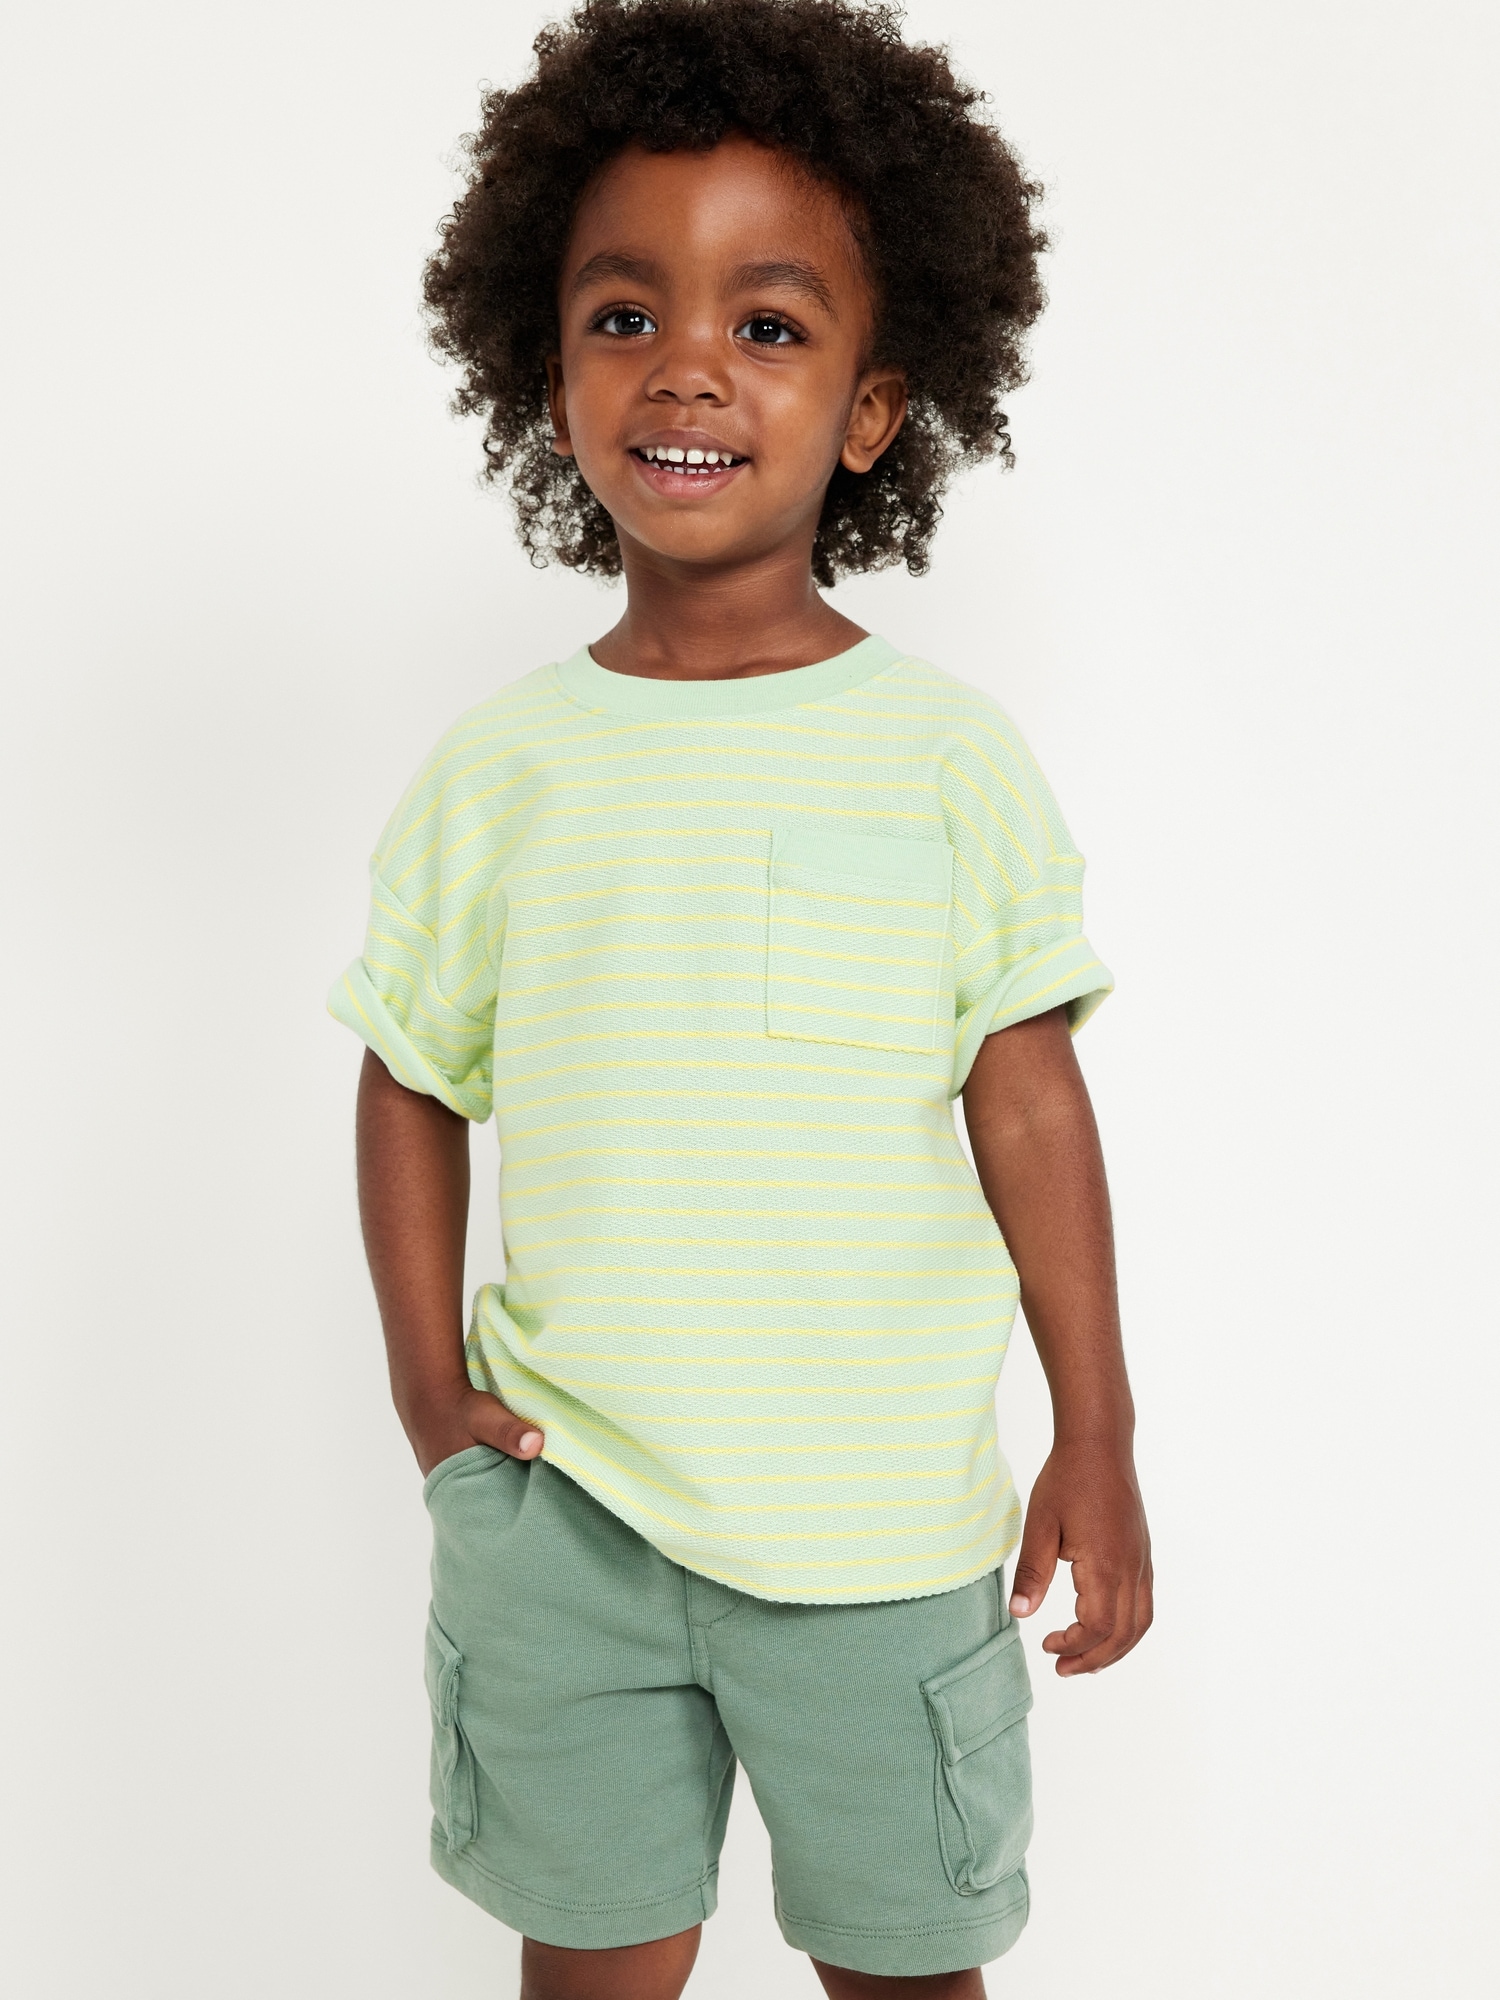 Oversized French-Terry Pocket T-Shirt for Toddler Boys